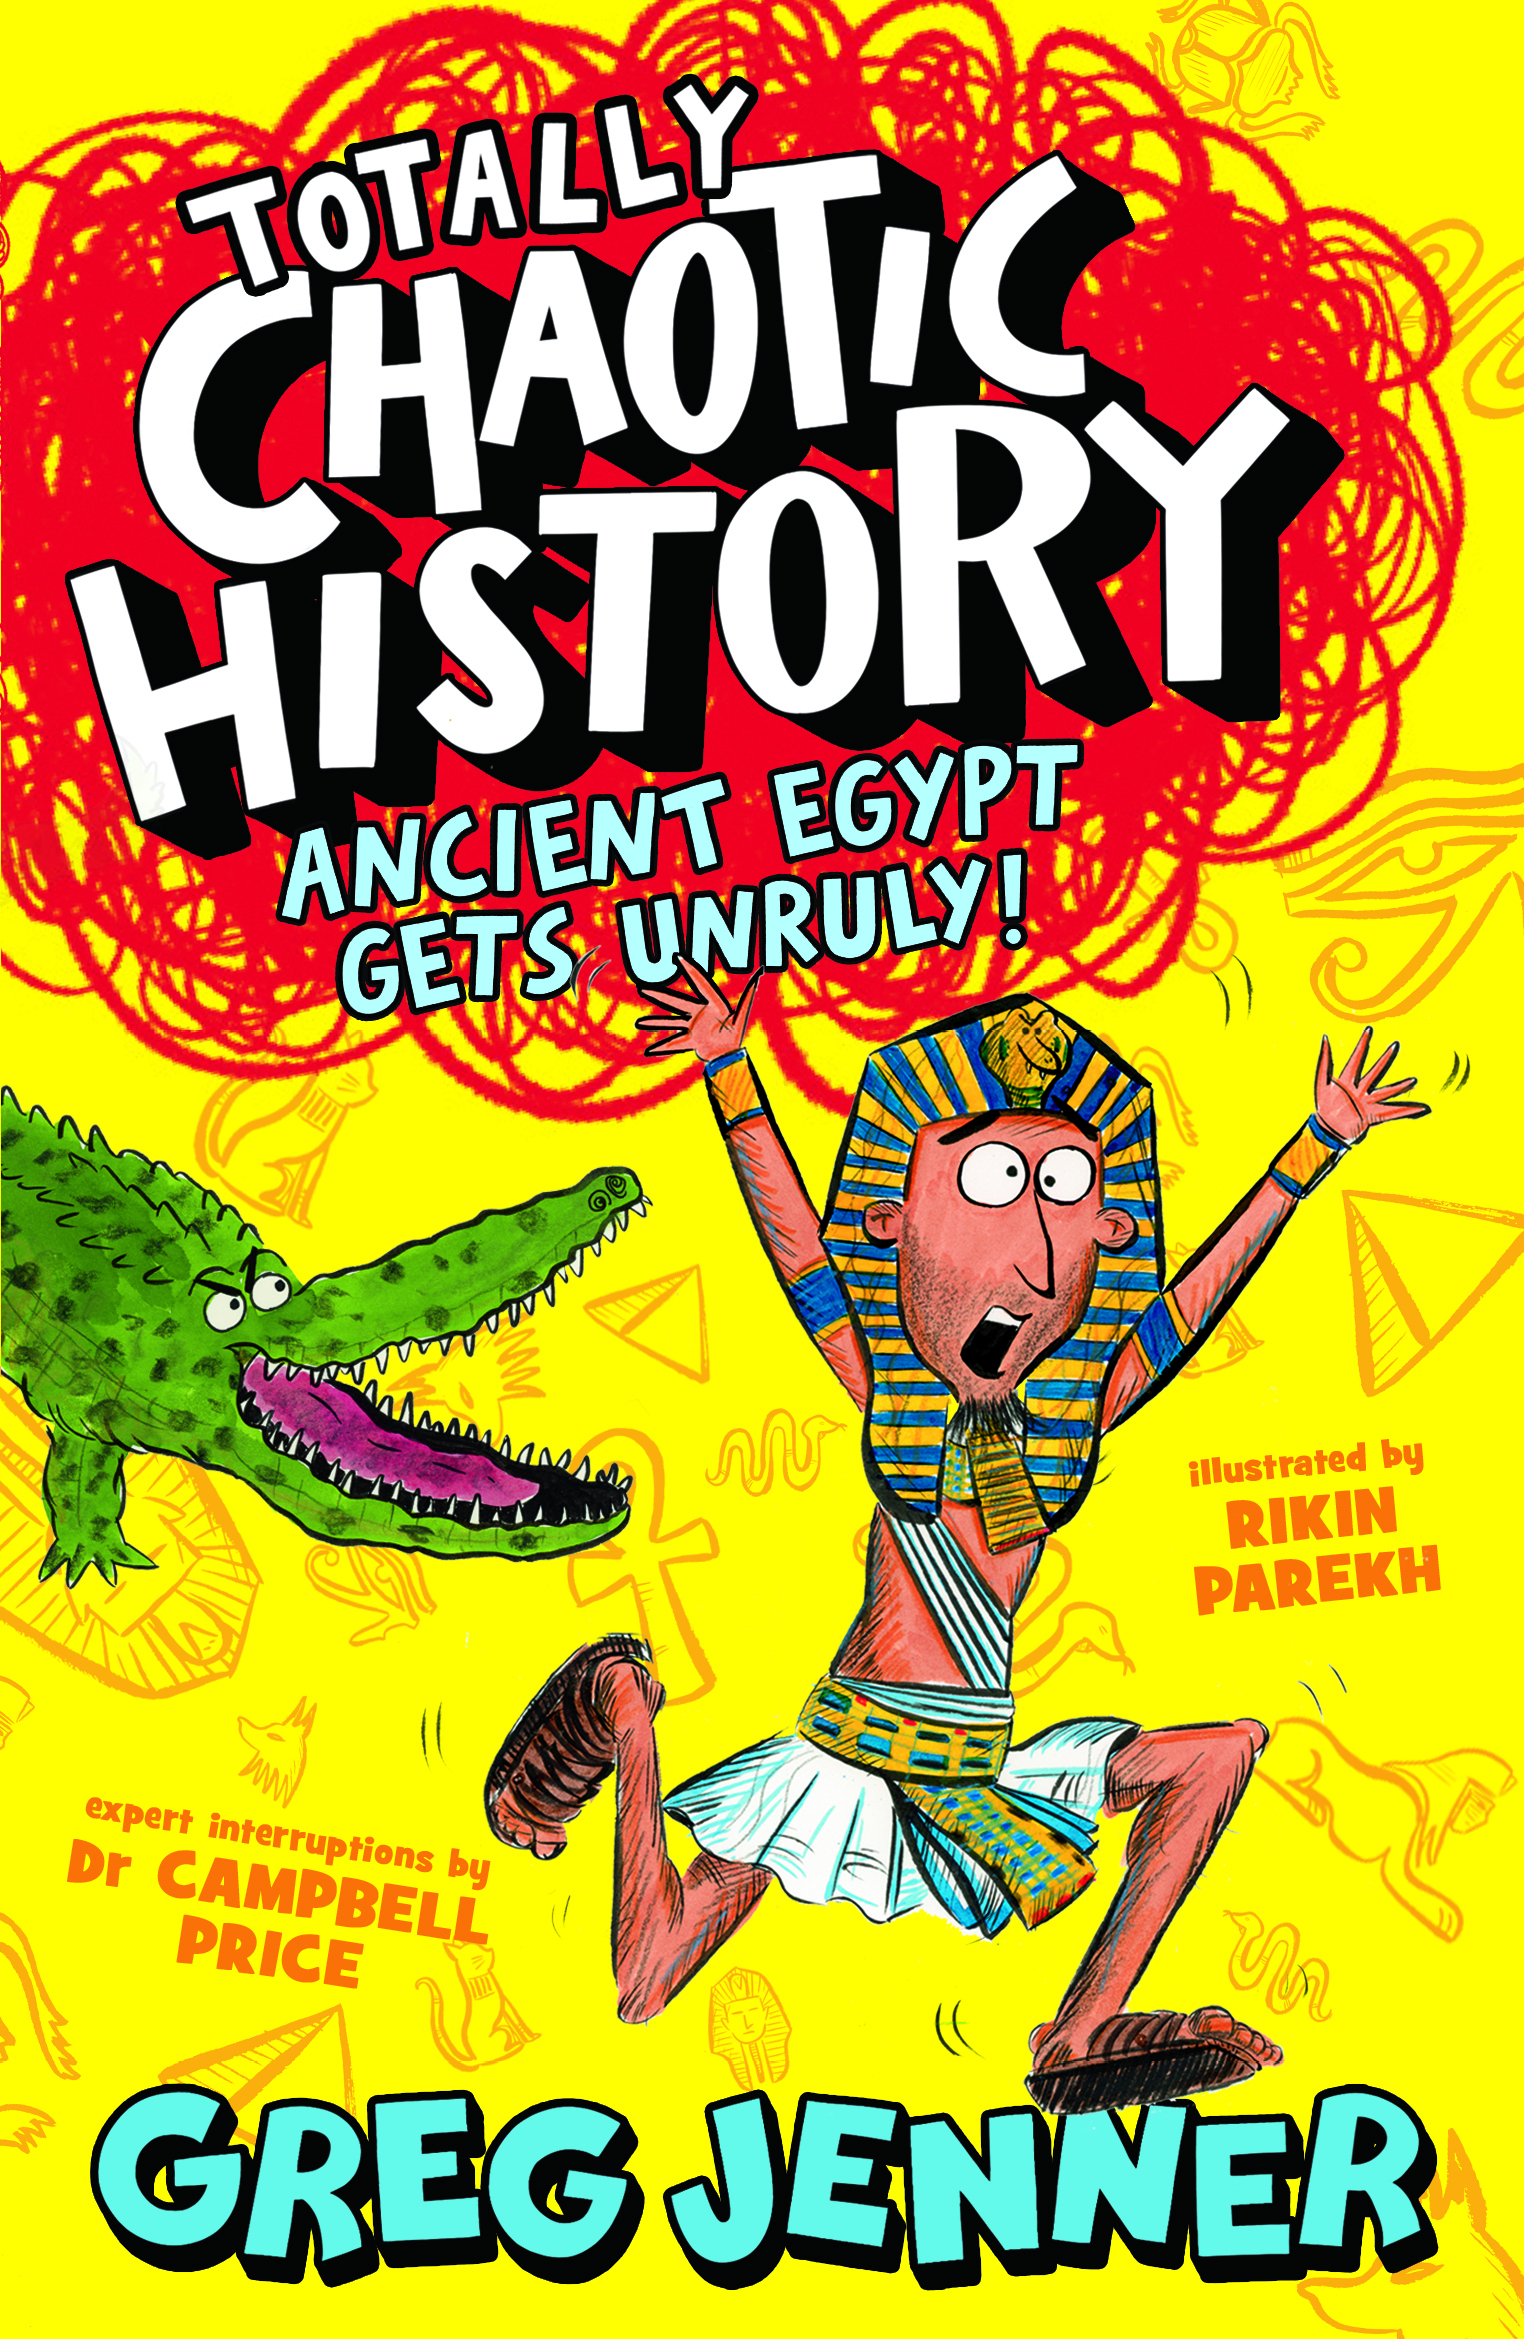 Totally-Chaotic-History-Ancient-Egypt-Gets-Unruly